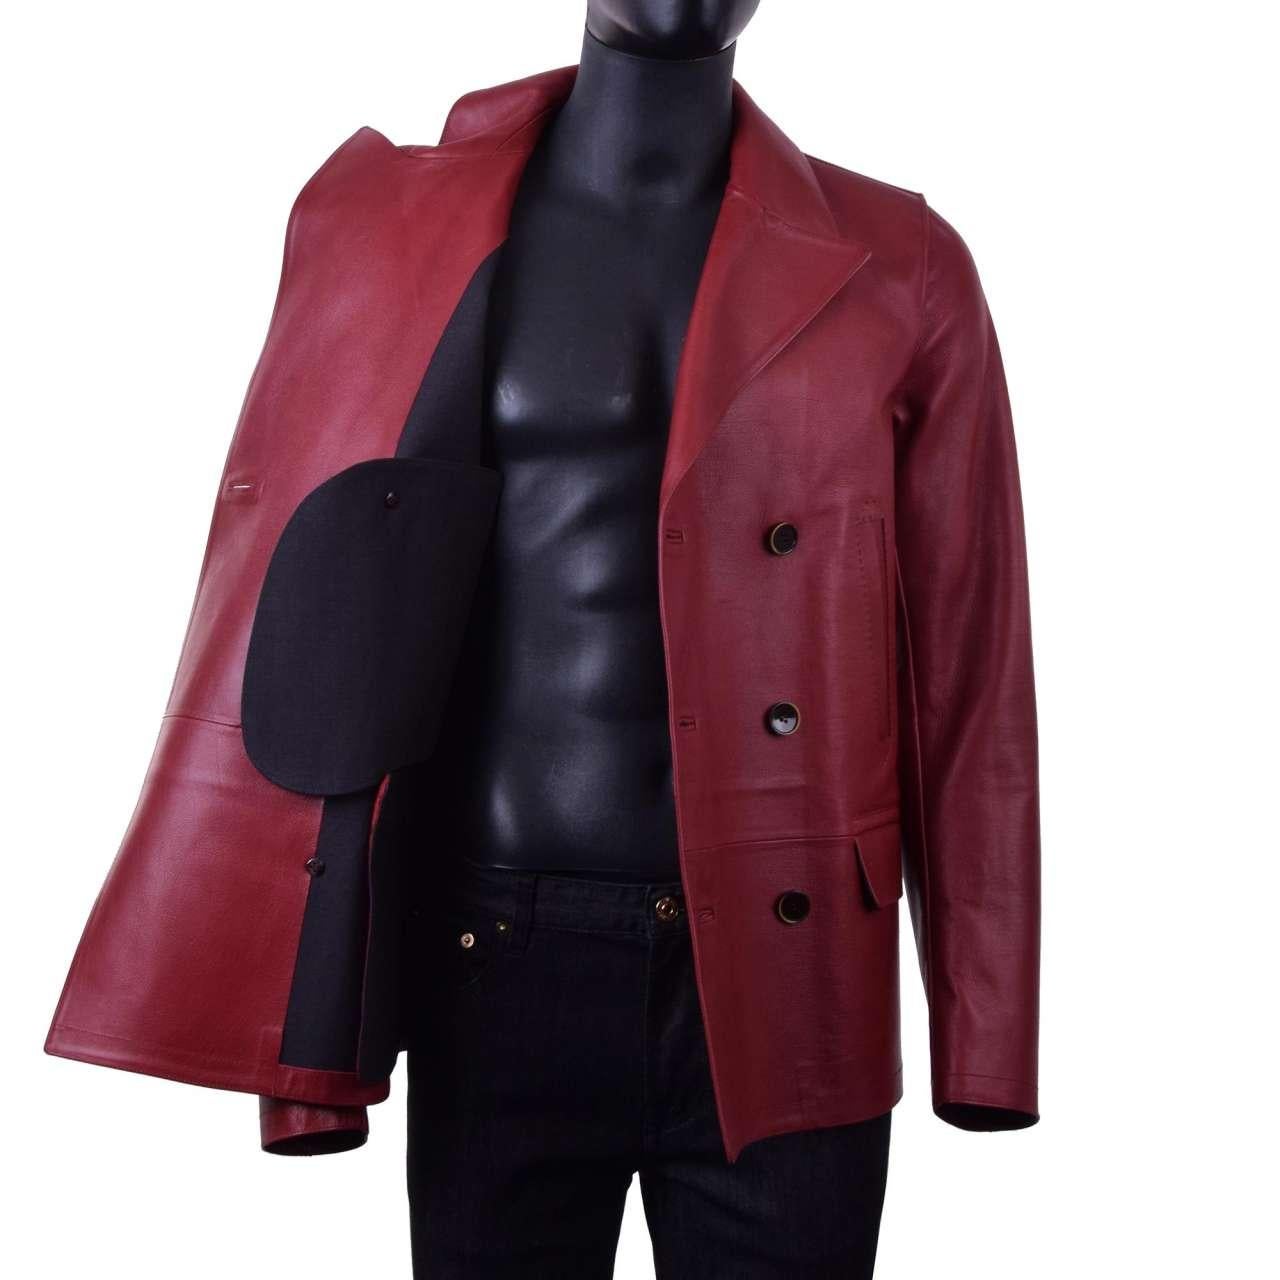 - Double-breasted calfskin coat with a wide collar by DOLCE & GABBANA Black Line - RUNWAY - Dolce & Gabbana Fashion Show - New with tag - Former RRP: EUR 5.250 - MADE in ITALY - Slim Fit - Model: G0655L-FUL2U-R5232 - Material: 90% Calfskin, 8%